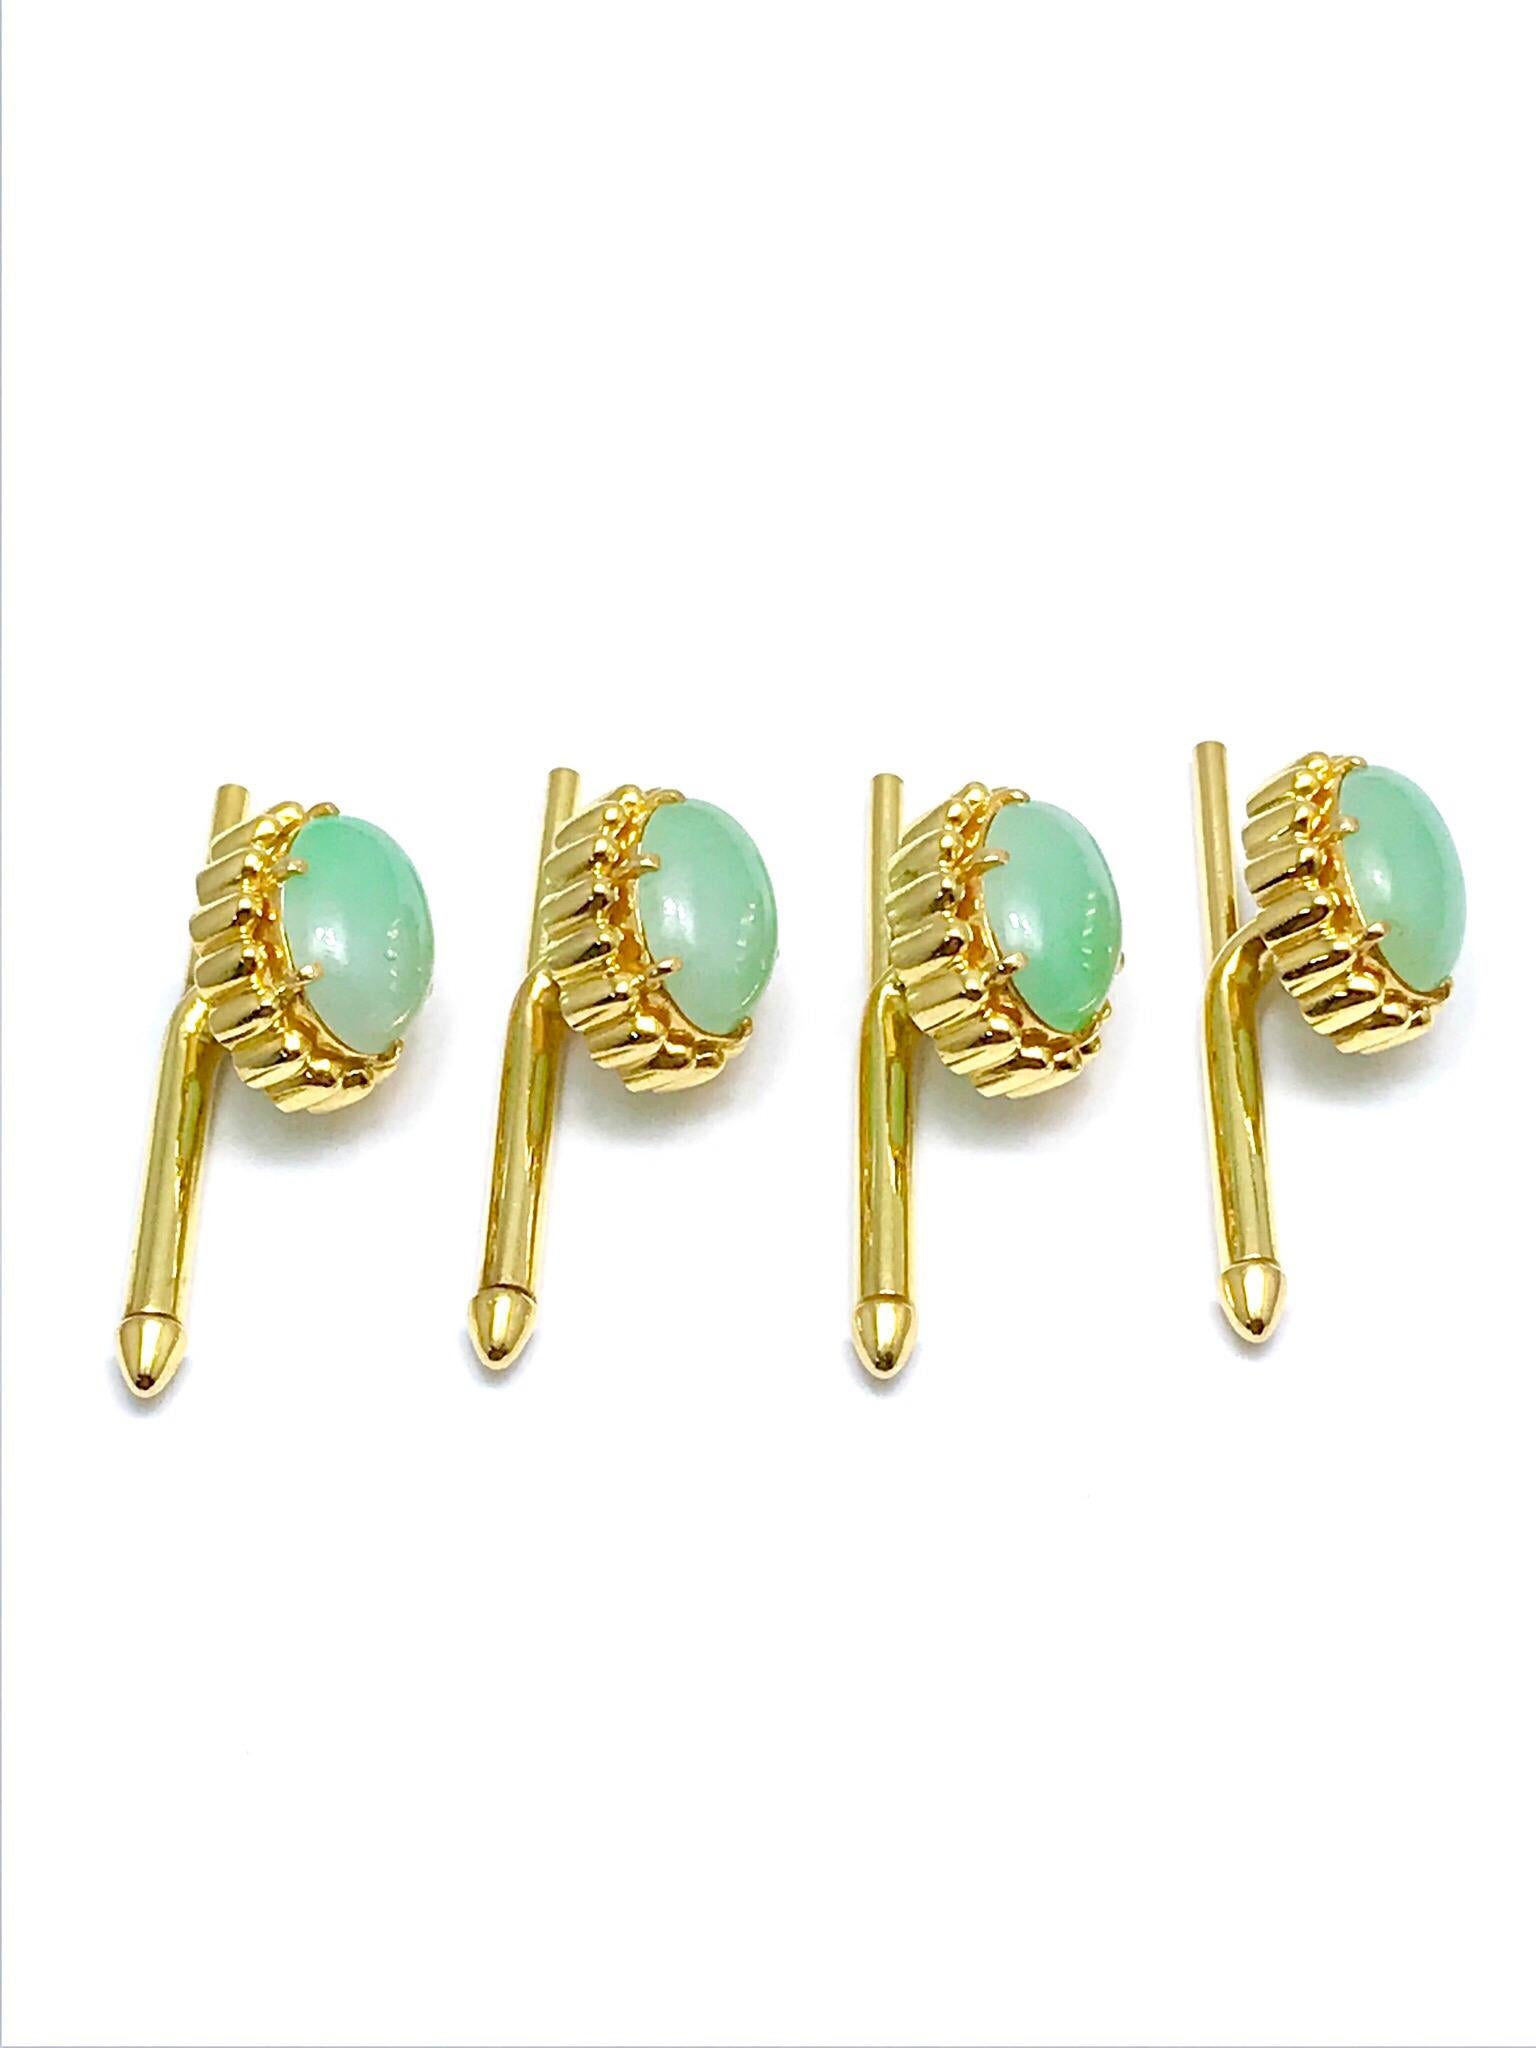 A wonderful set of oval cabochon Jade and 18 karat yellow gold studs.  Great for anyone that has formal occasions throughout the year.   The Jade measure 10.70 x 8.00mm, set with six prongs each, with a textured gold frame, and spring loaded backs. 